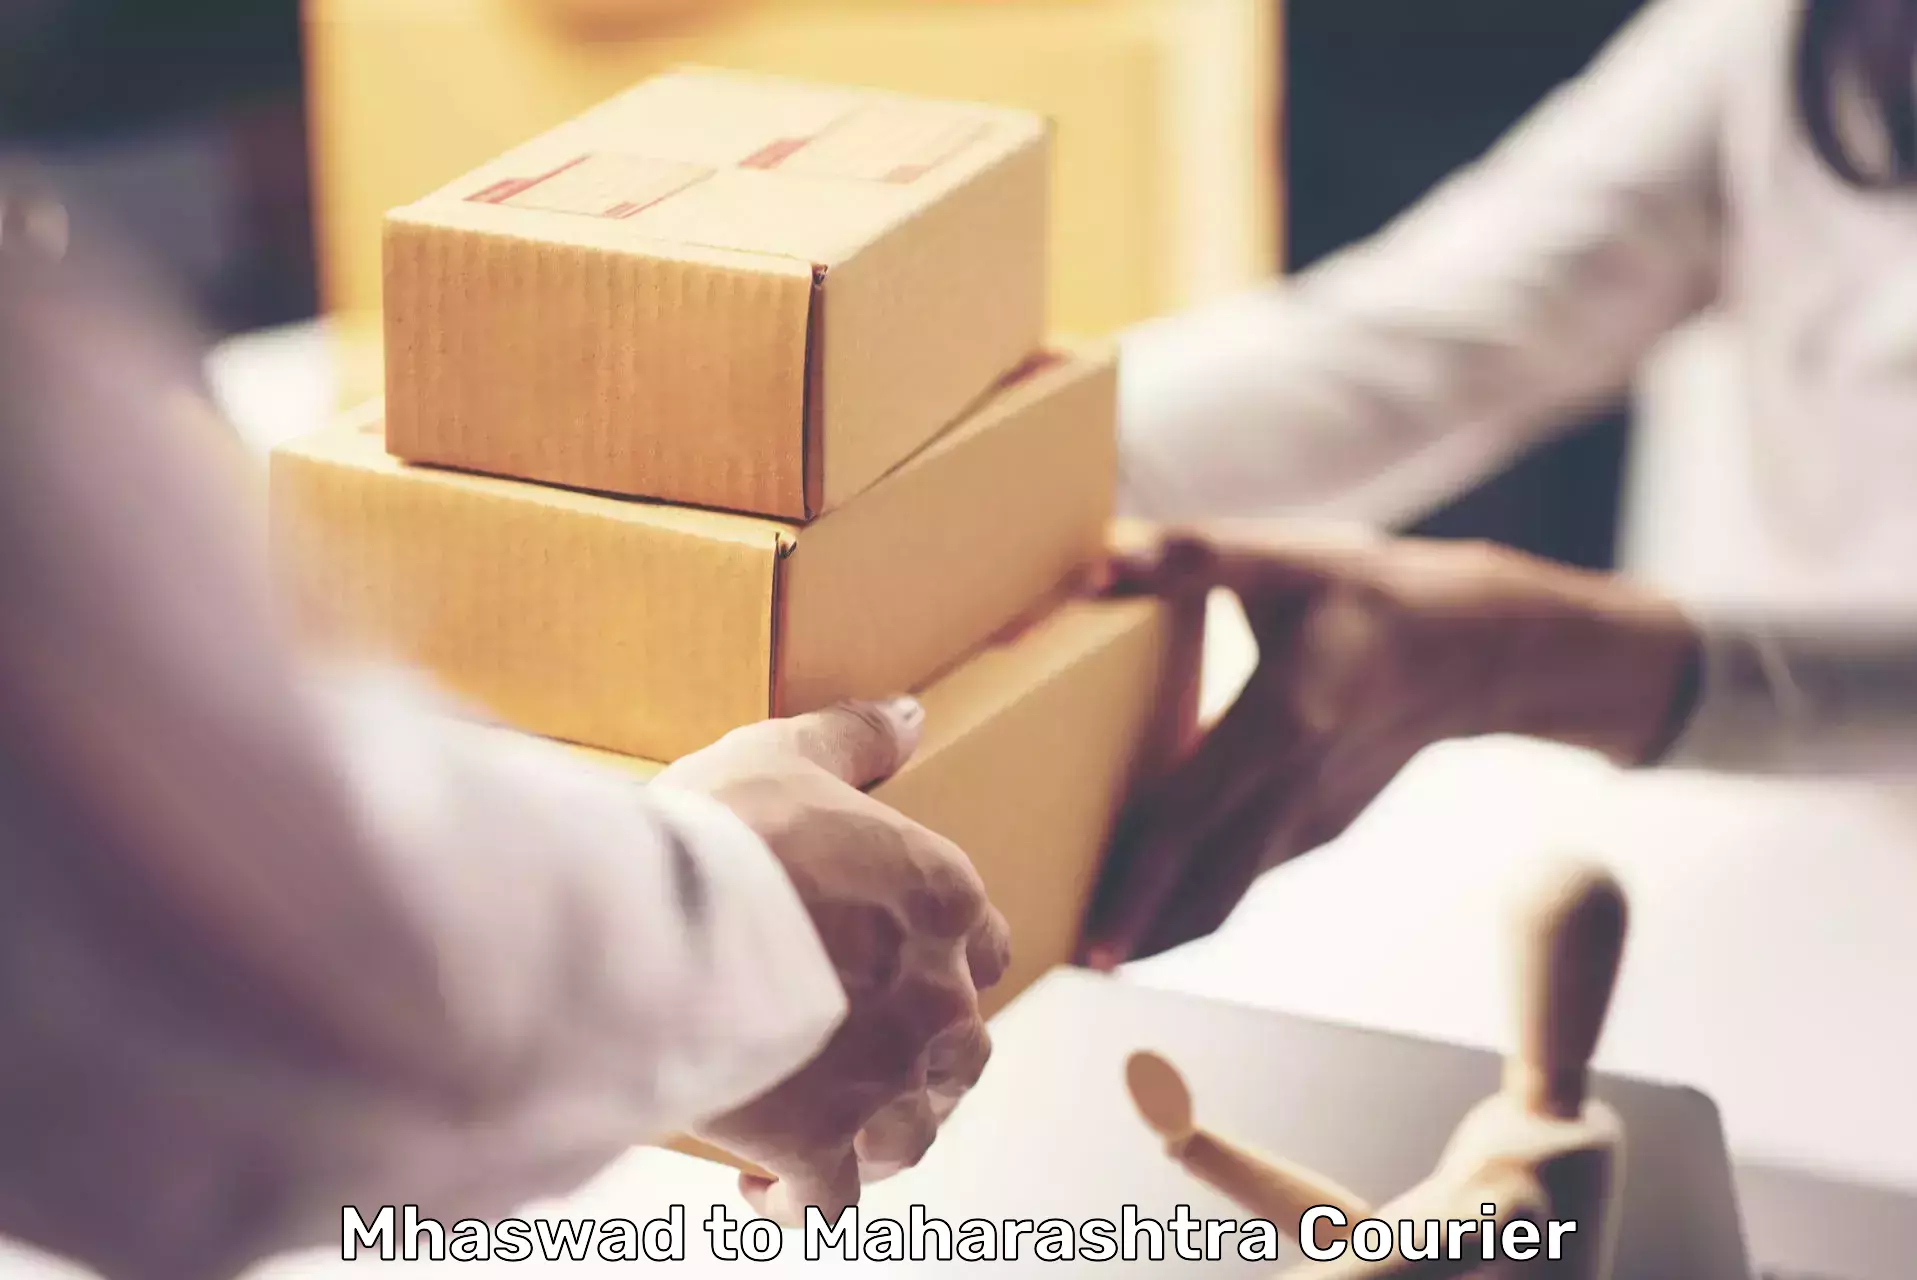 Professional courier handling Mhaswad to Murbad